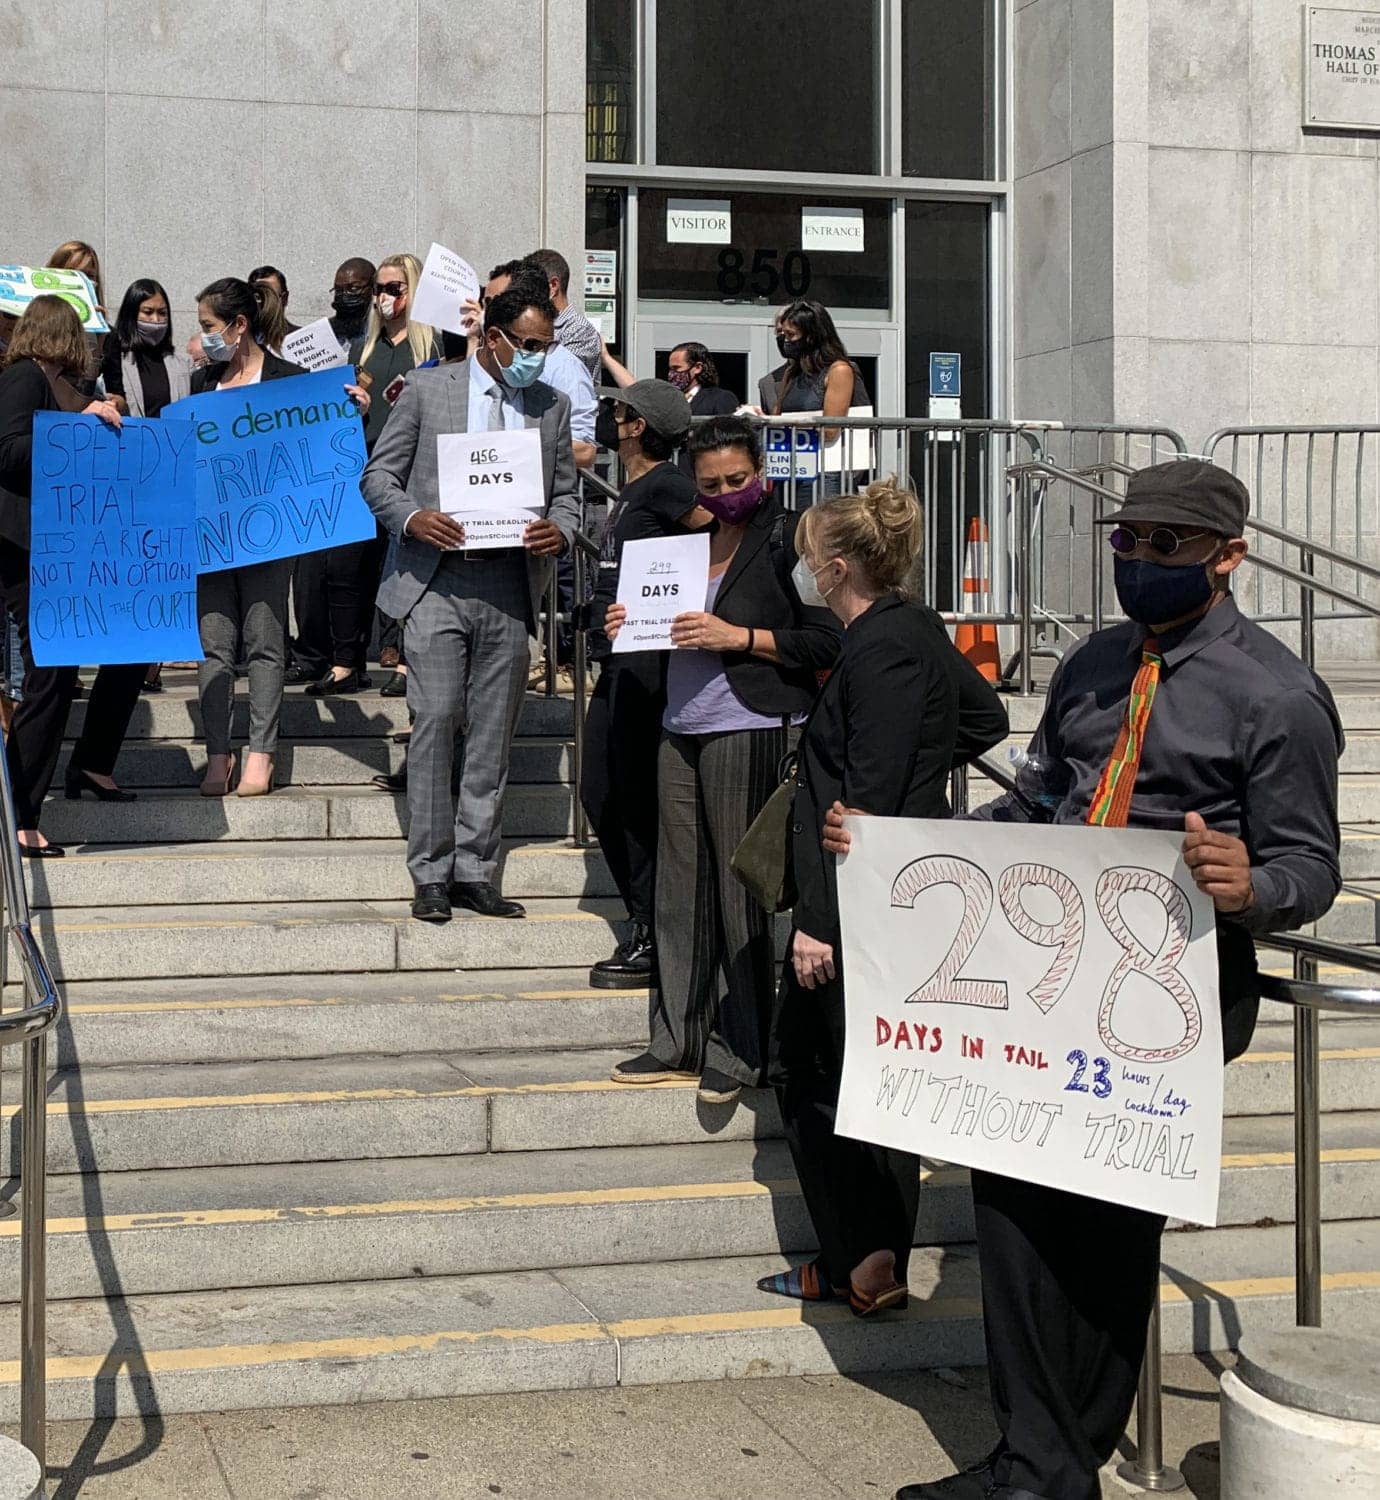 SF-Public-Defender-rally-and-press-conference-to-enforce-speedy-trials-Hall-of-Justice-0921-by-Nube-Brown, SF jury takes only 5 hours to reach a not guilty verdict for a man who’s been waiting 17 months to fight false accusations in court, Local News & Views 